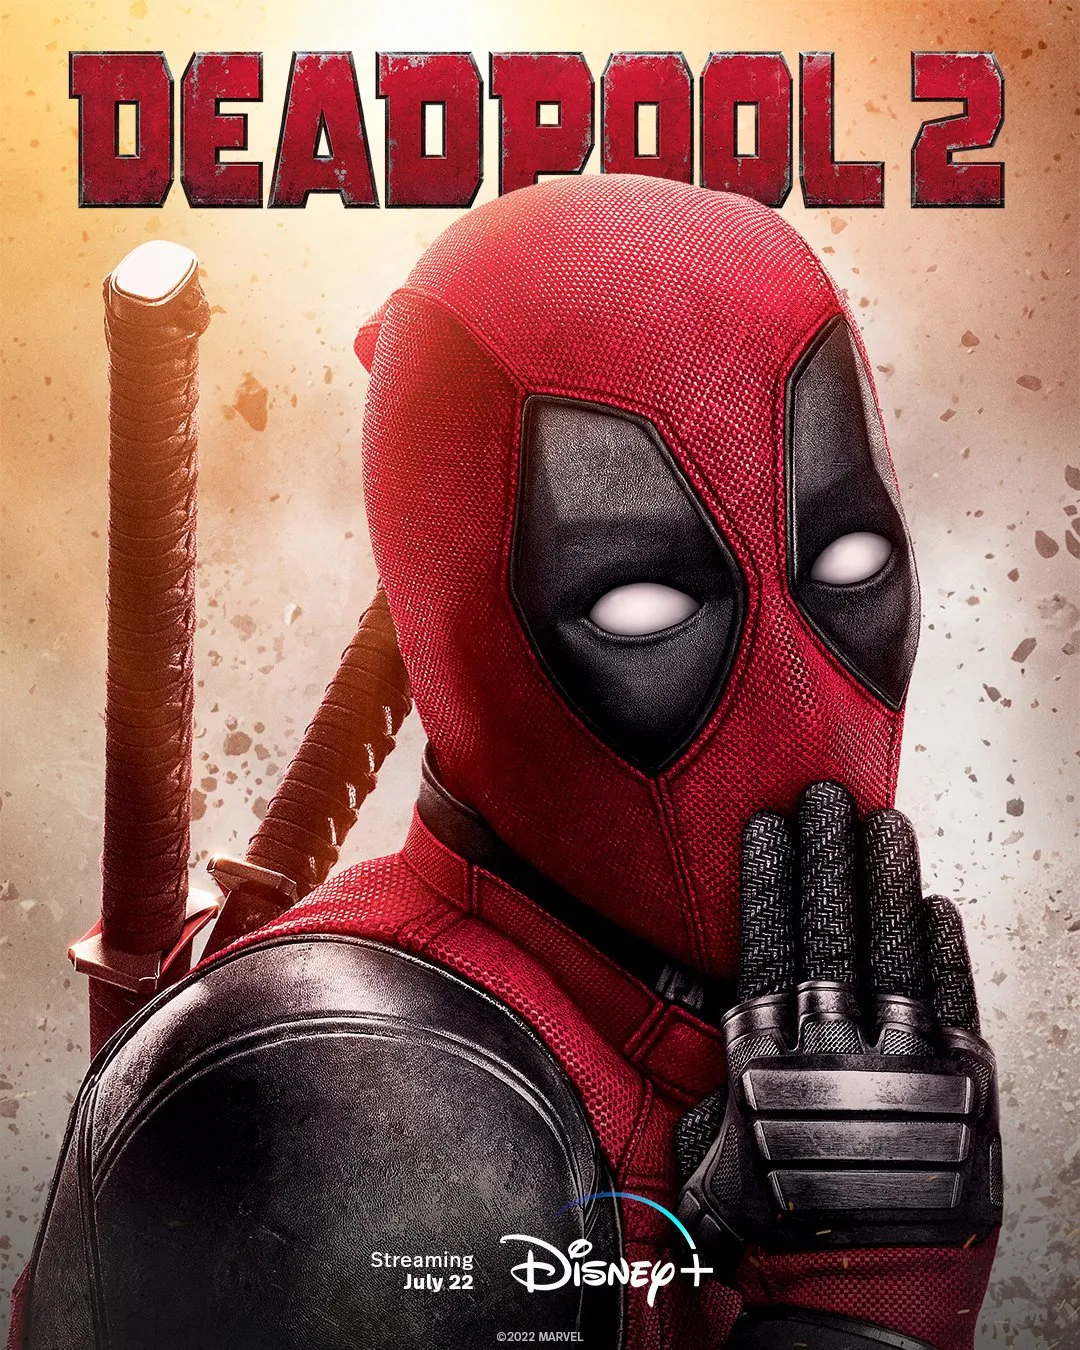 Disney+ Announces 3 R-Rated Marvel Movies 'Deadpool', 'Deadpool 2' and 'Logan' to Launch Today | FMV6